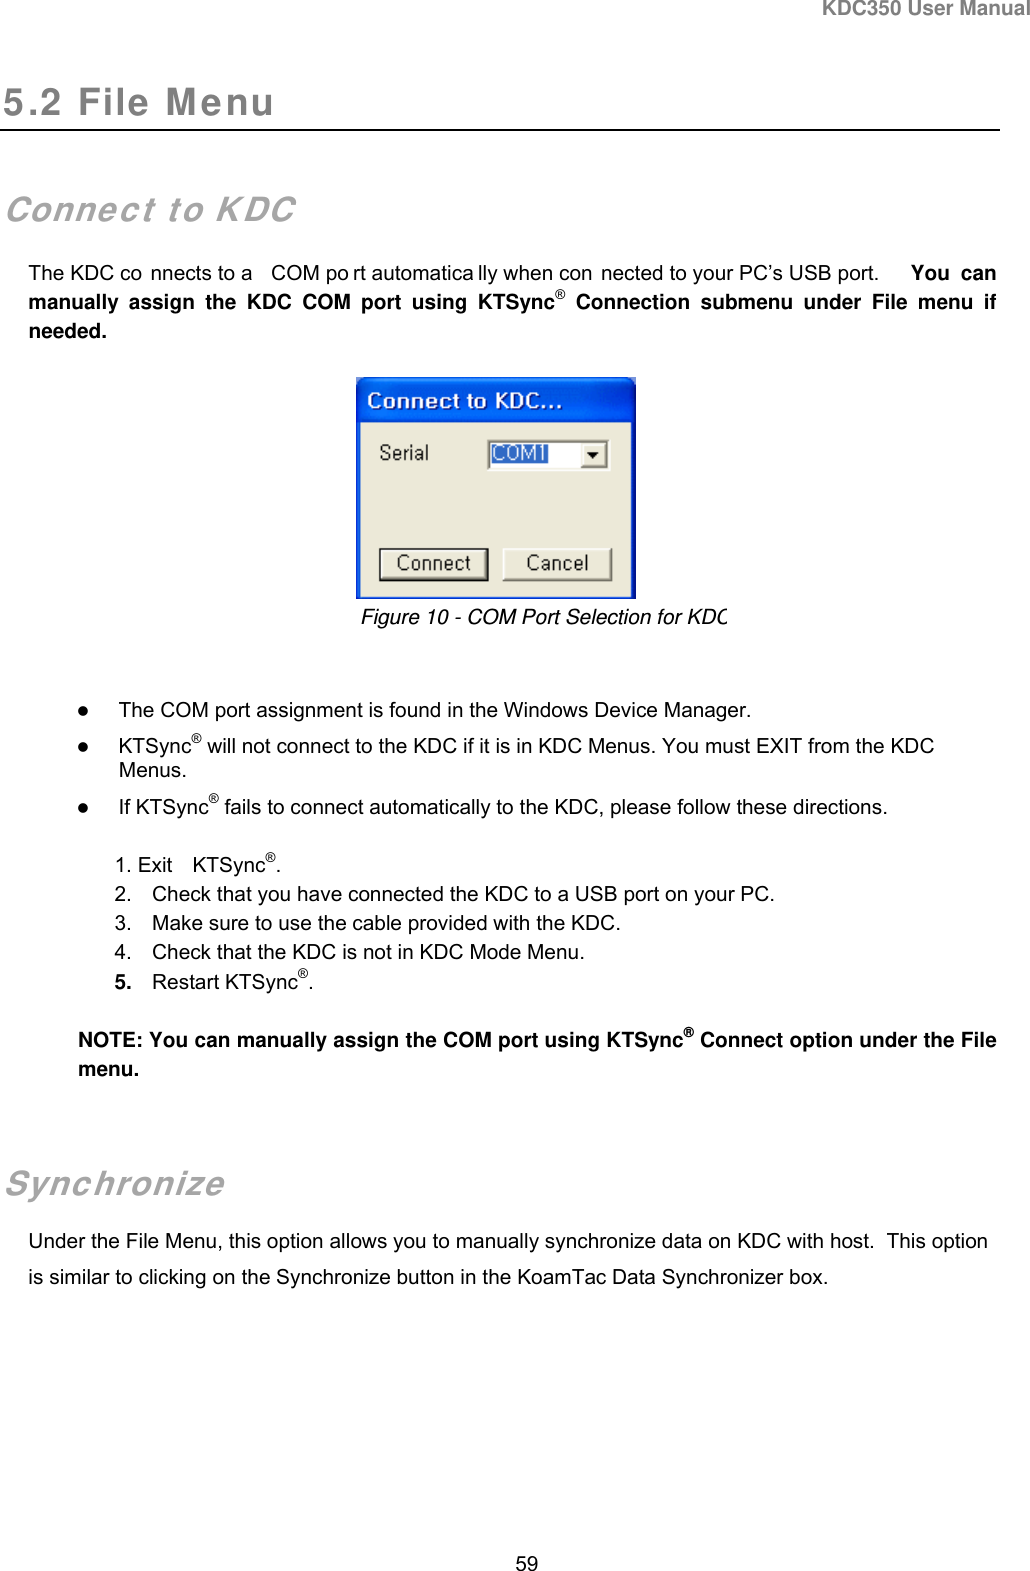 KDC350 User Manual  59  5.2 File Menu   Connect to KDC The KDC co nnects to a  COM po rt automatica lly when con nected to your PC’s USB port.  You can manually assign the KDC COM port using KTSync® Connection submenu under File menu if needed.         The COM port assignment is found in the Windows Device Manager.  KTSync® will not connect to the KDC if it is in KDC Menus. You must EXIT from the KDC Menus.  If KTSync® fails to connect automatically to the KDC, please follow these directions. 1. Exit KTSync®. 2.  Check that you have connected the KDC to a USB port on your PC. 3.  Make sure to use the cable provided with the KDC.   4.  Check that the KDC is not in KDC Mode Menu.   5.  Restart KTSync®. NOTE: You can manually assign the COM port using KTSync® Connect option under the File menu.  Synchronize Under the File Menu, this option allows you to manually synchronize data on KDC with host.  This option is similar to clicking on the Synchronize button in the KoamTac Data Synchronizer box.   Figure 10 - COM Port Selection for KDC